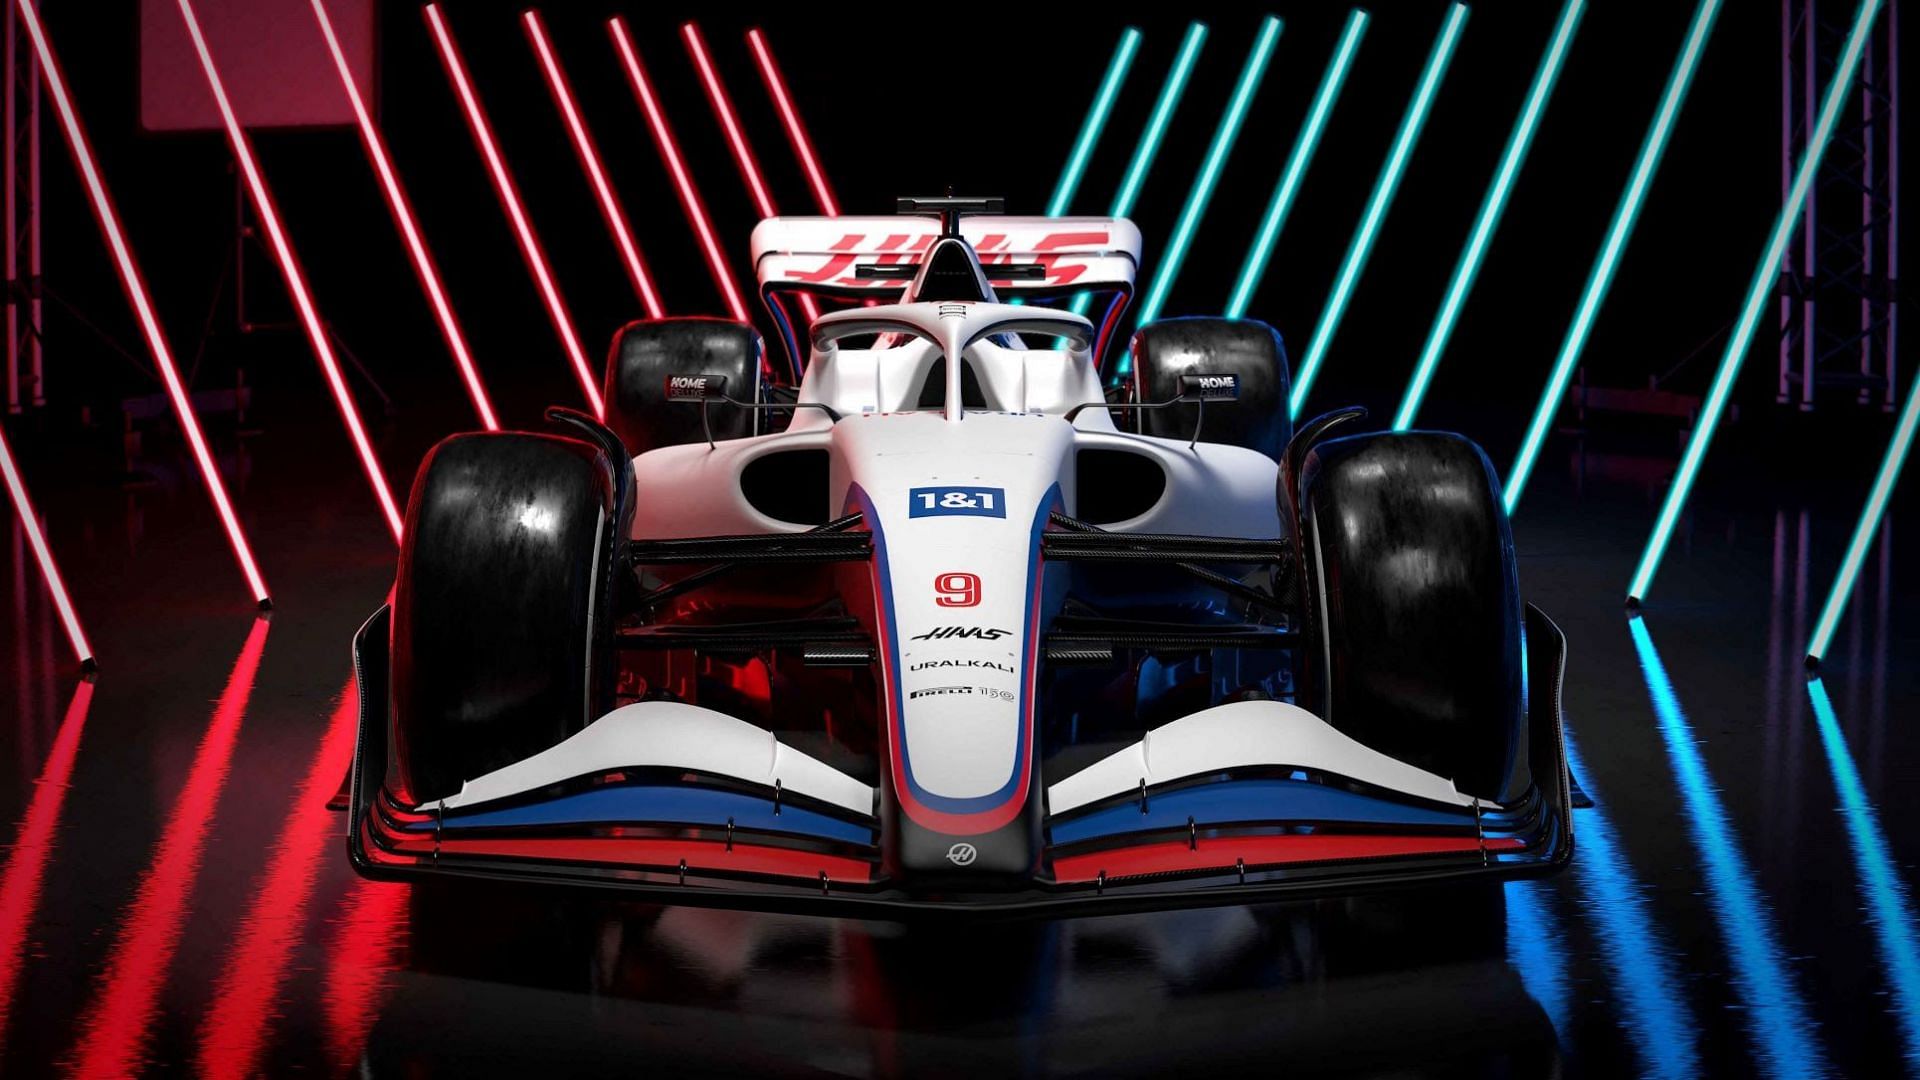 The Haas VF22 was unveiled ahead of the 2022 F1 season (Photo courtesy: Haas F1 team images)